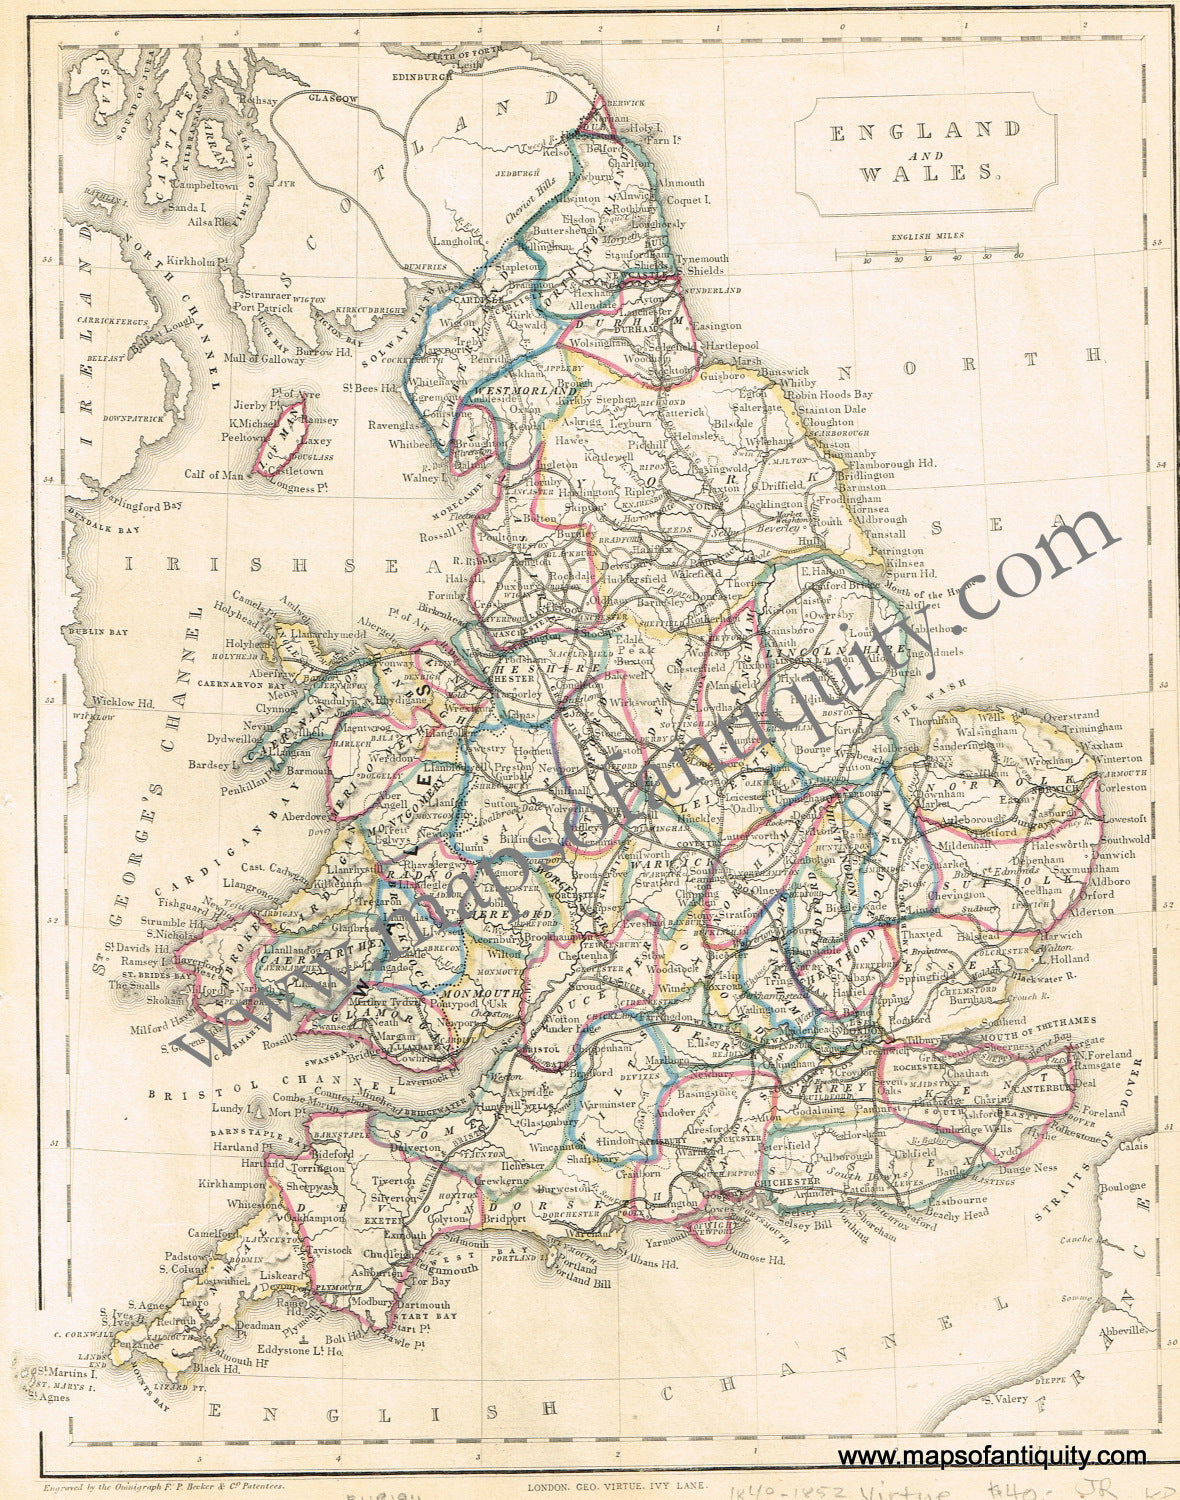 Antique-Hand-Colored-Map-England-and-Wales-Europe-England-1840-1852-Virtue-Maps-Of-Antiquity